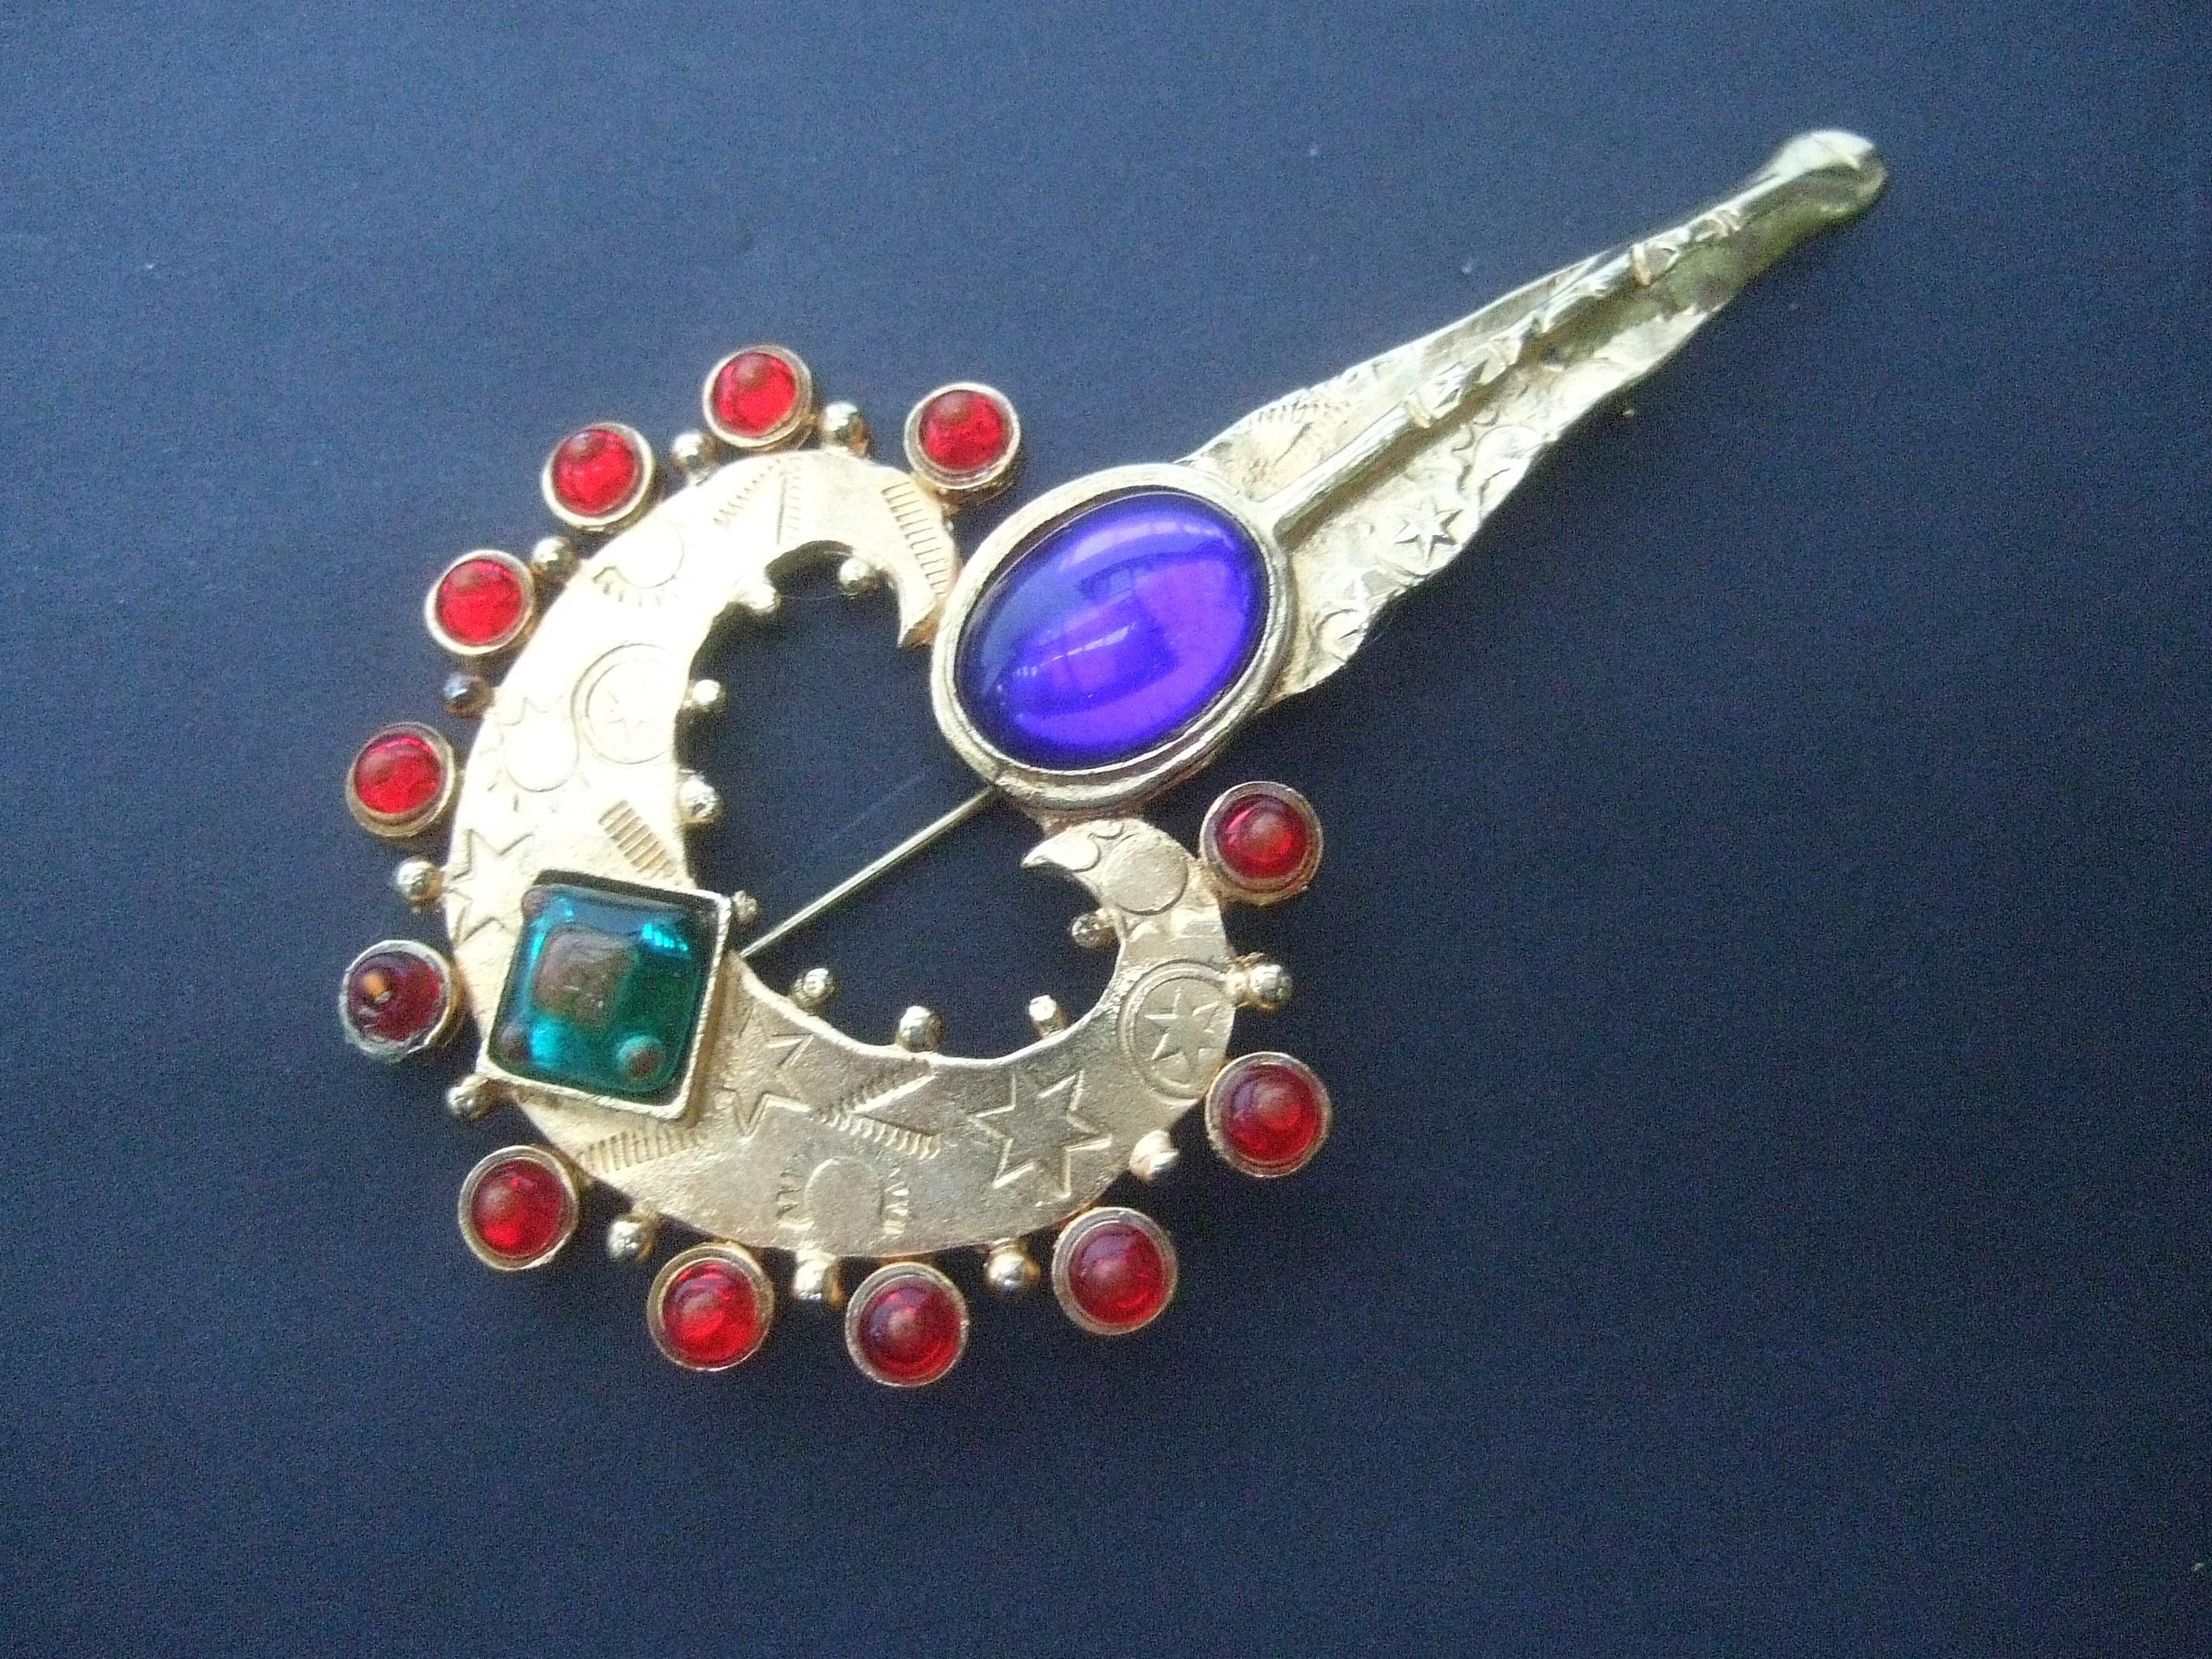 Glass Jeweled Heart & Key Brooch Designed by Robert Rose c 1980s For Sale 4